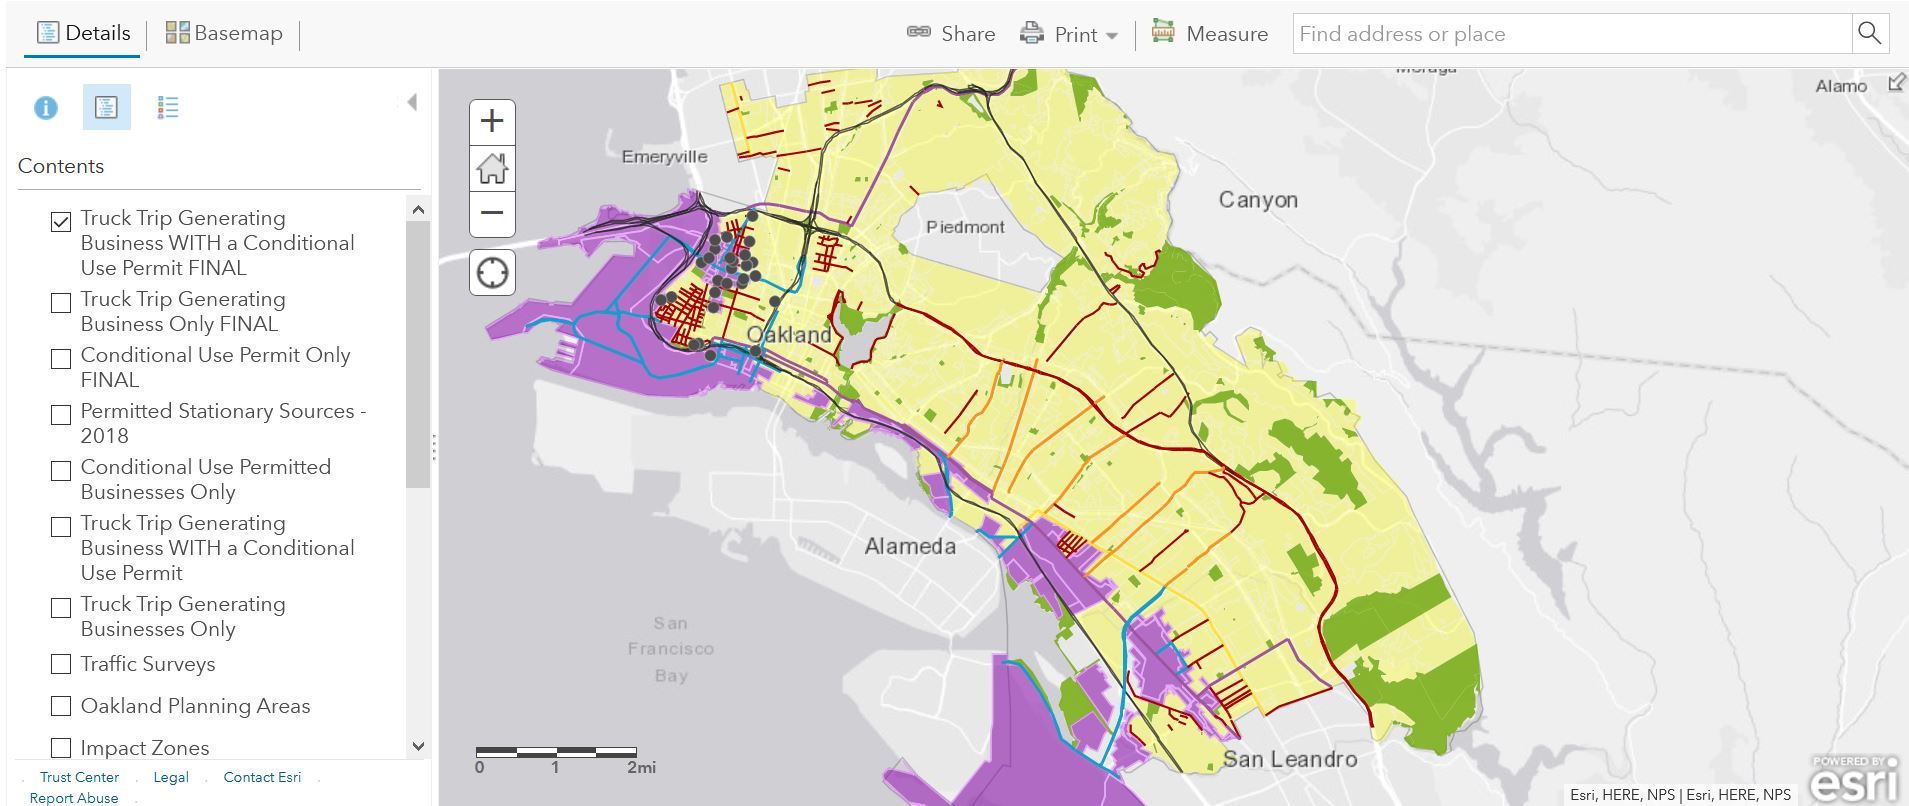 Zoning and Air Pollution Mapping Tool